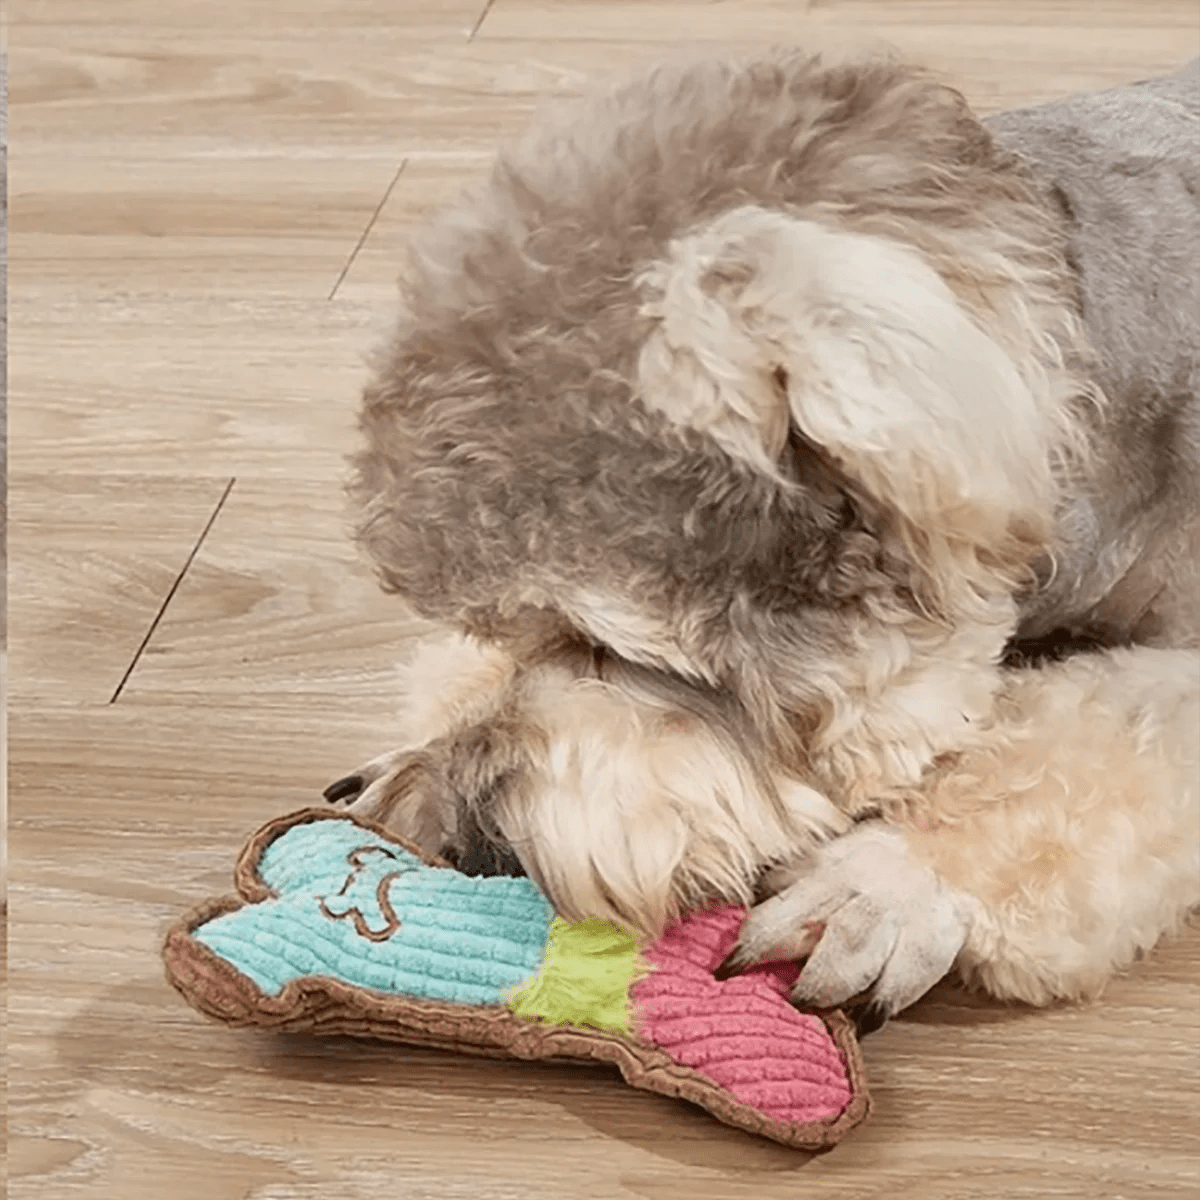 indestructible dog toys , Squeaky Toys, Plush Dogs Chew